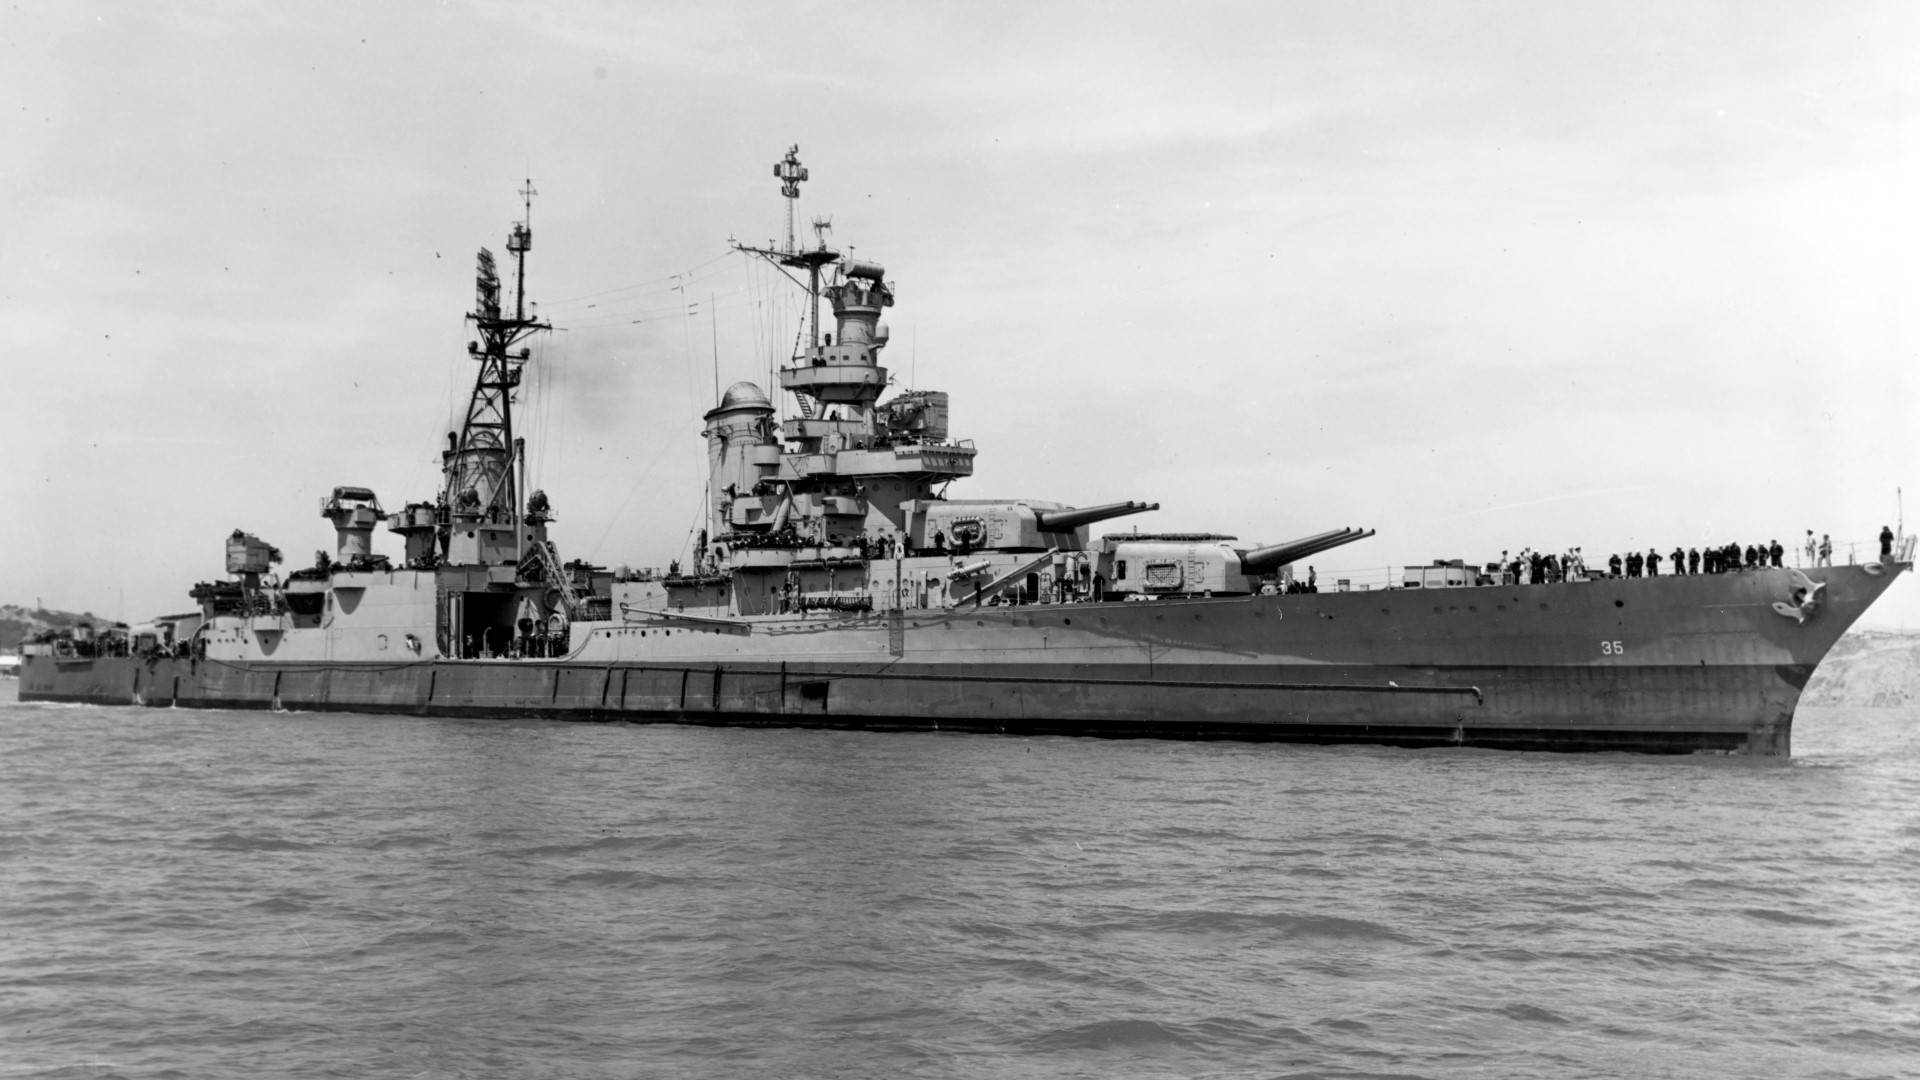 Michigan had 98 crew members on board the USS Indianapolis when the cruiser sank. For 104 hours the crew waited in the Pacific Ocean for help.